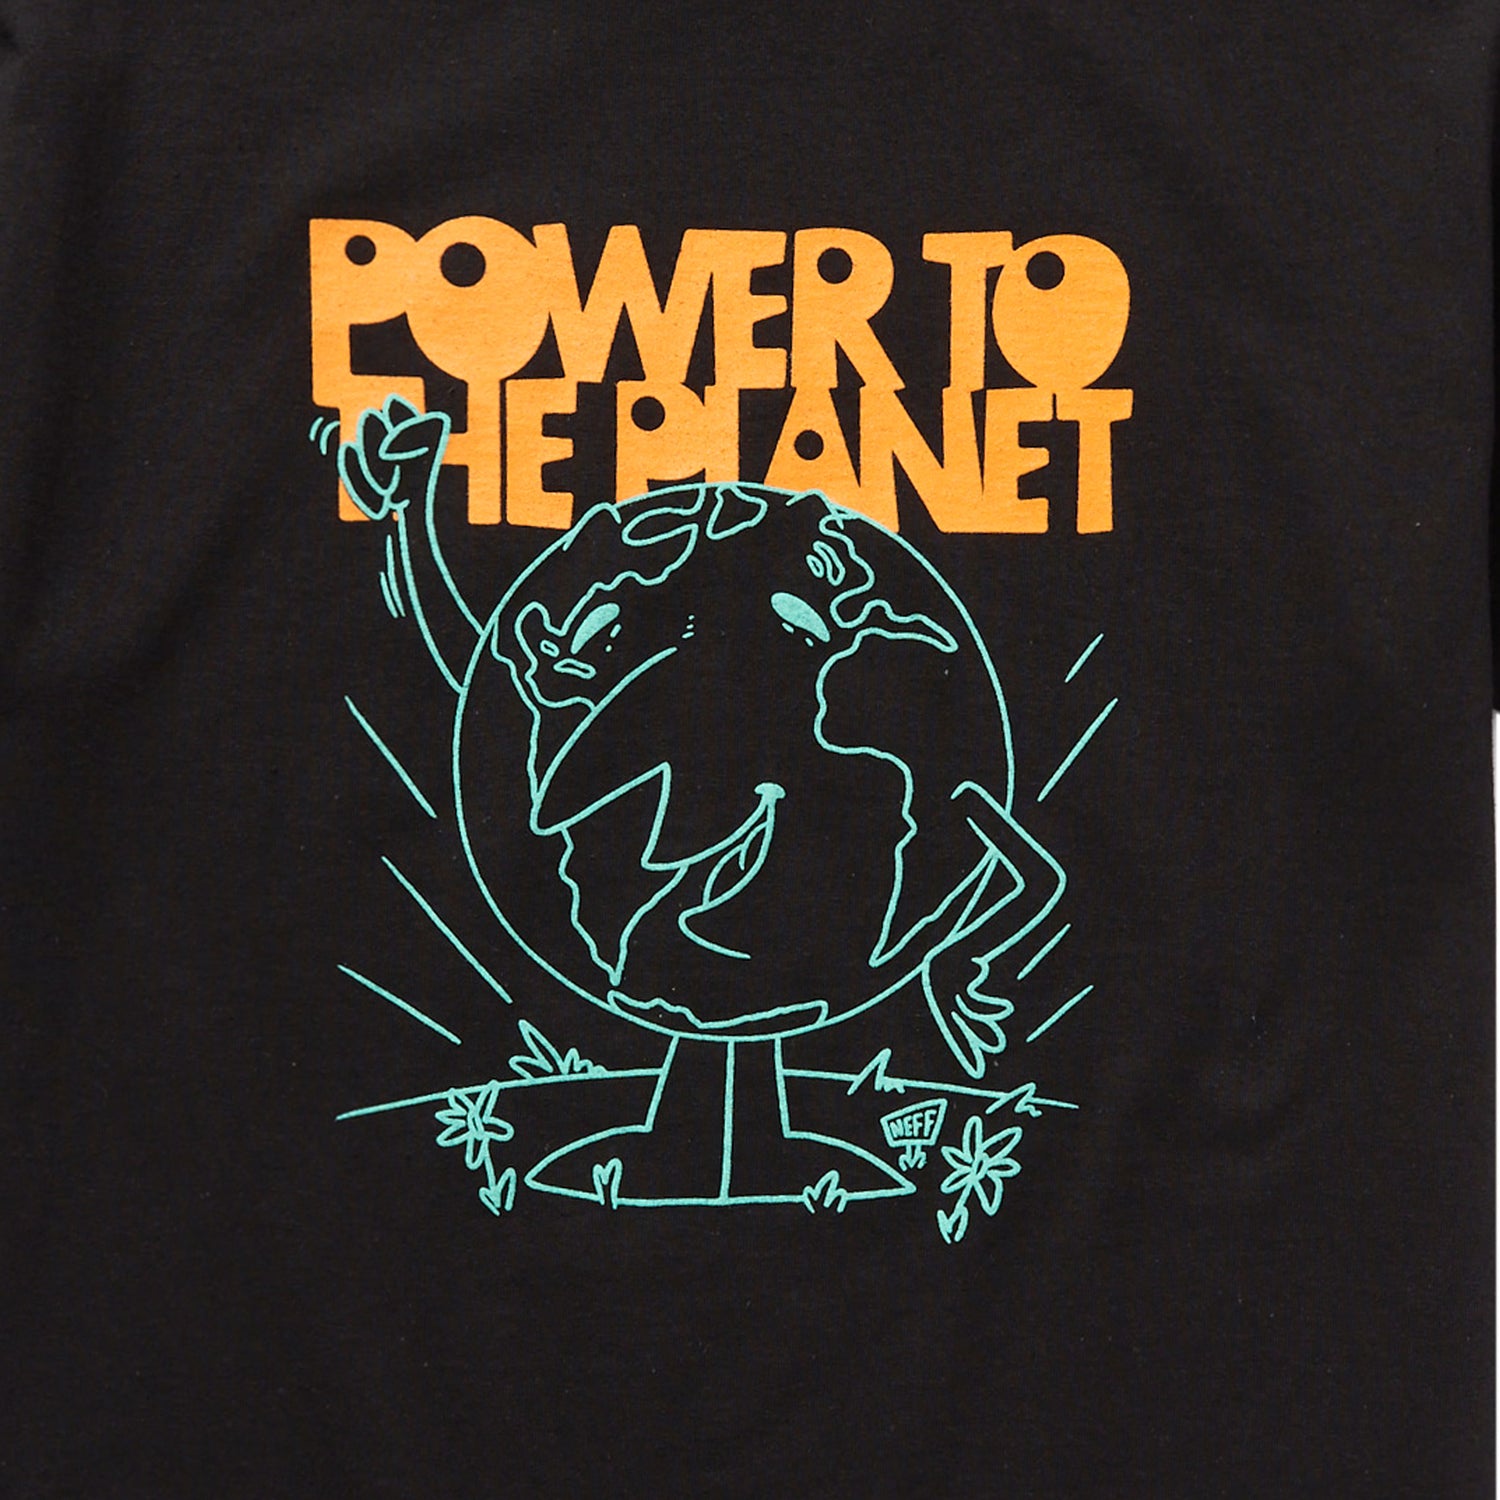 POWER TO THE PEOPLE TEE - BLACK